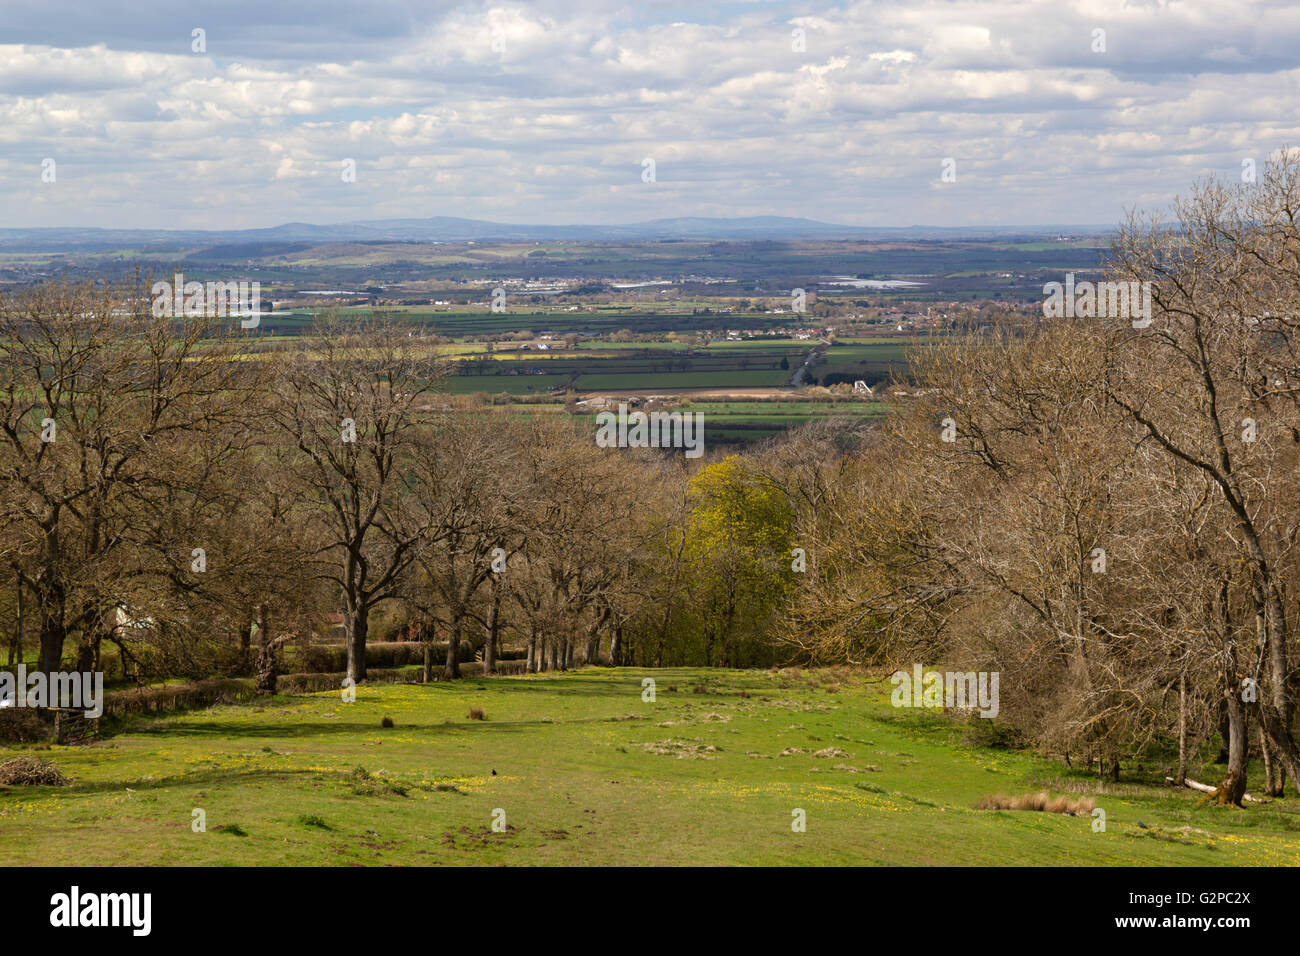 View from Dover's Hill over Vale of Evesham, Chipping Campden, Cotswolds, Gloucestershire, England, United Kingdom, Europe Stock Photo